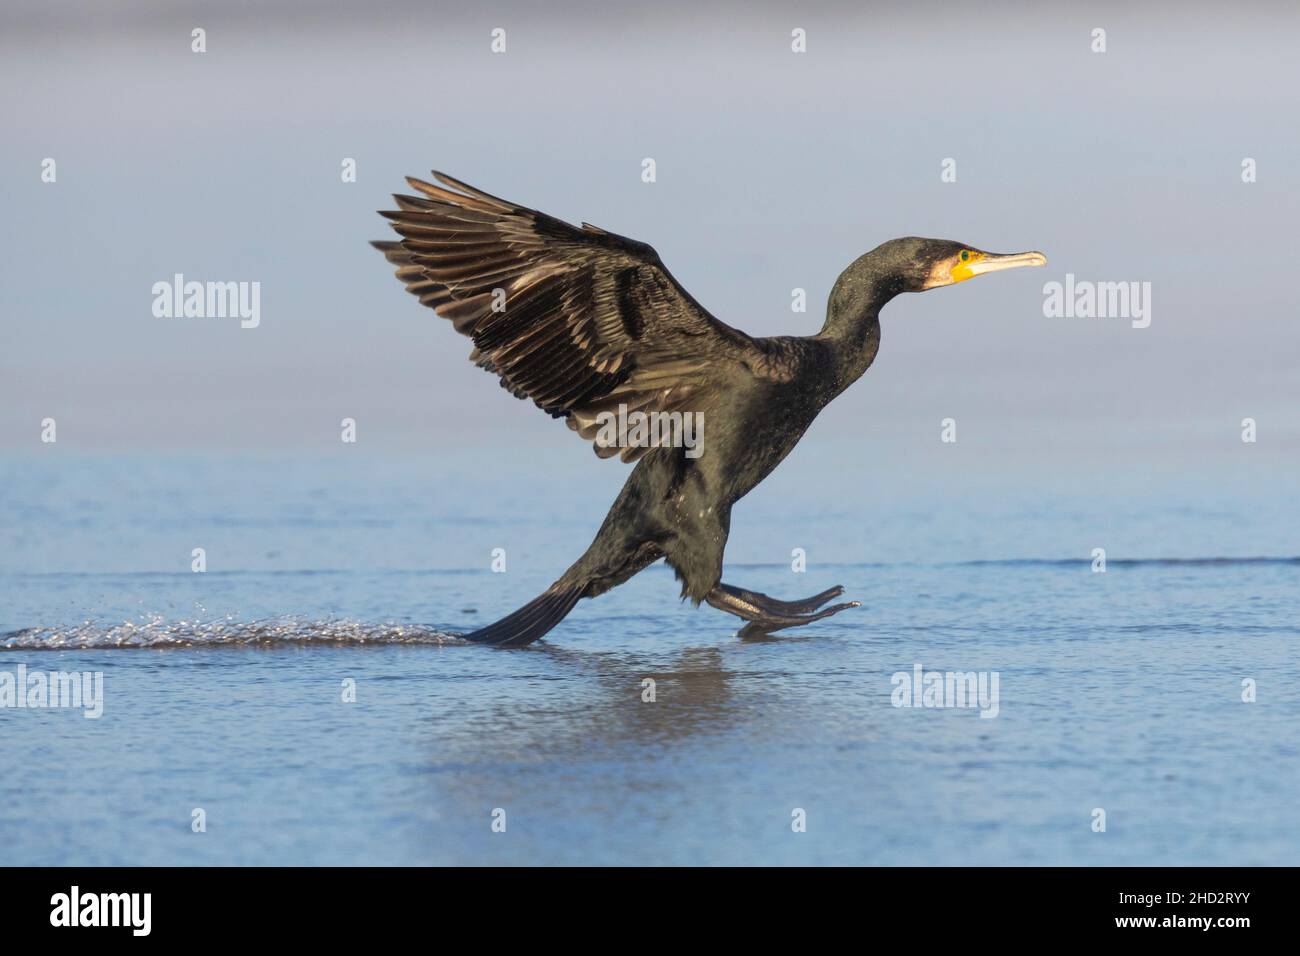 Great Cormorant (Phalacrocorax carbo sinensis), side view of an adult landing, Campania, Italy Stock Photo